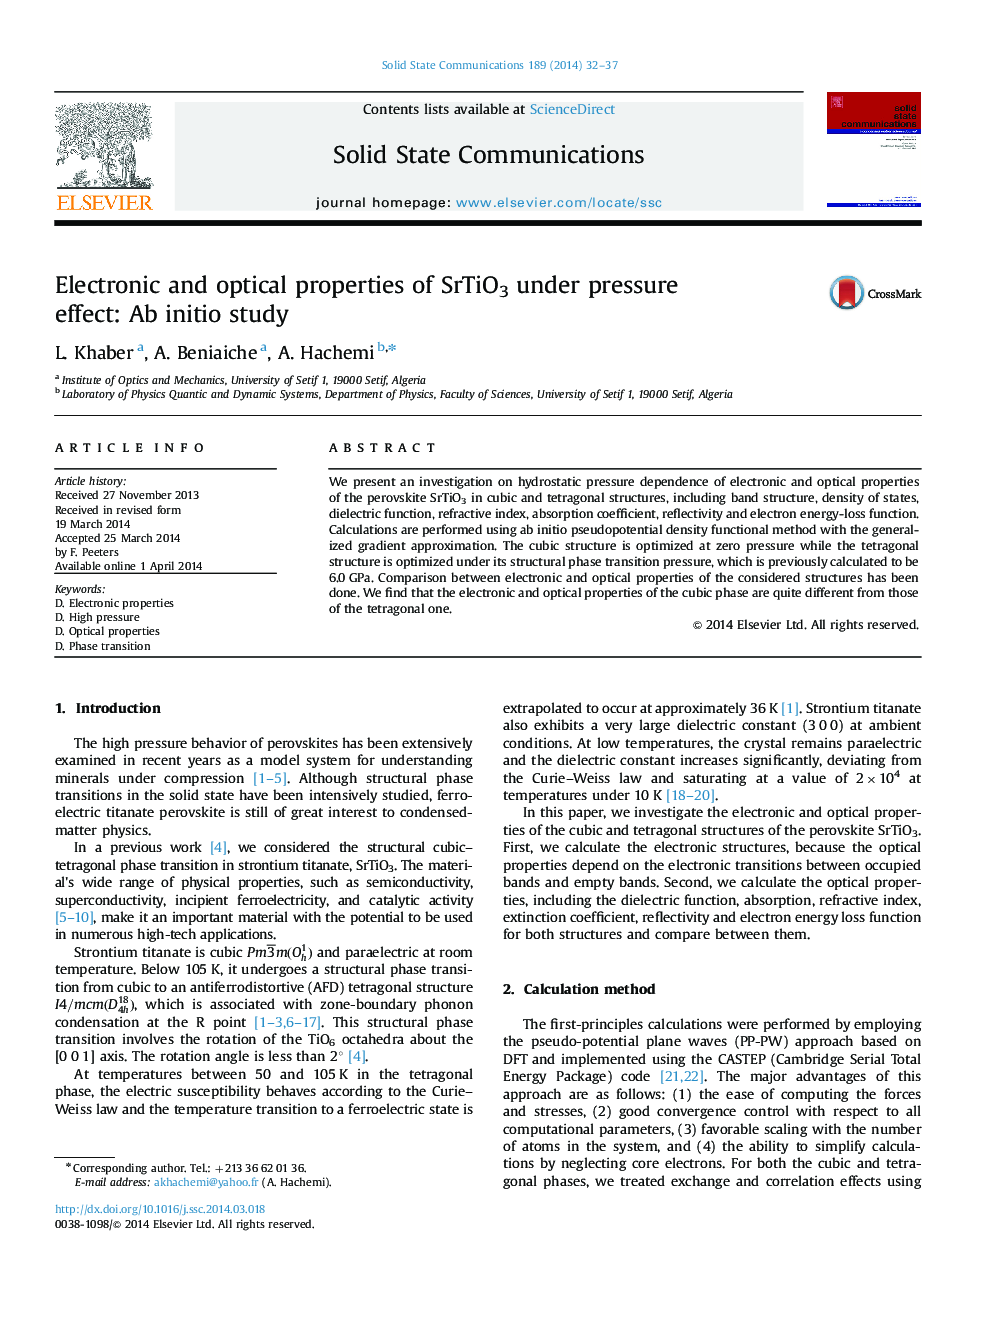 Electronic and optical properties of SrTiO3 under pressure effect: Ab initio study